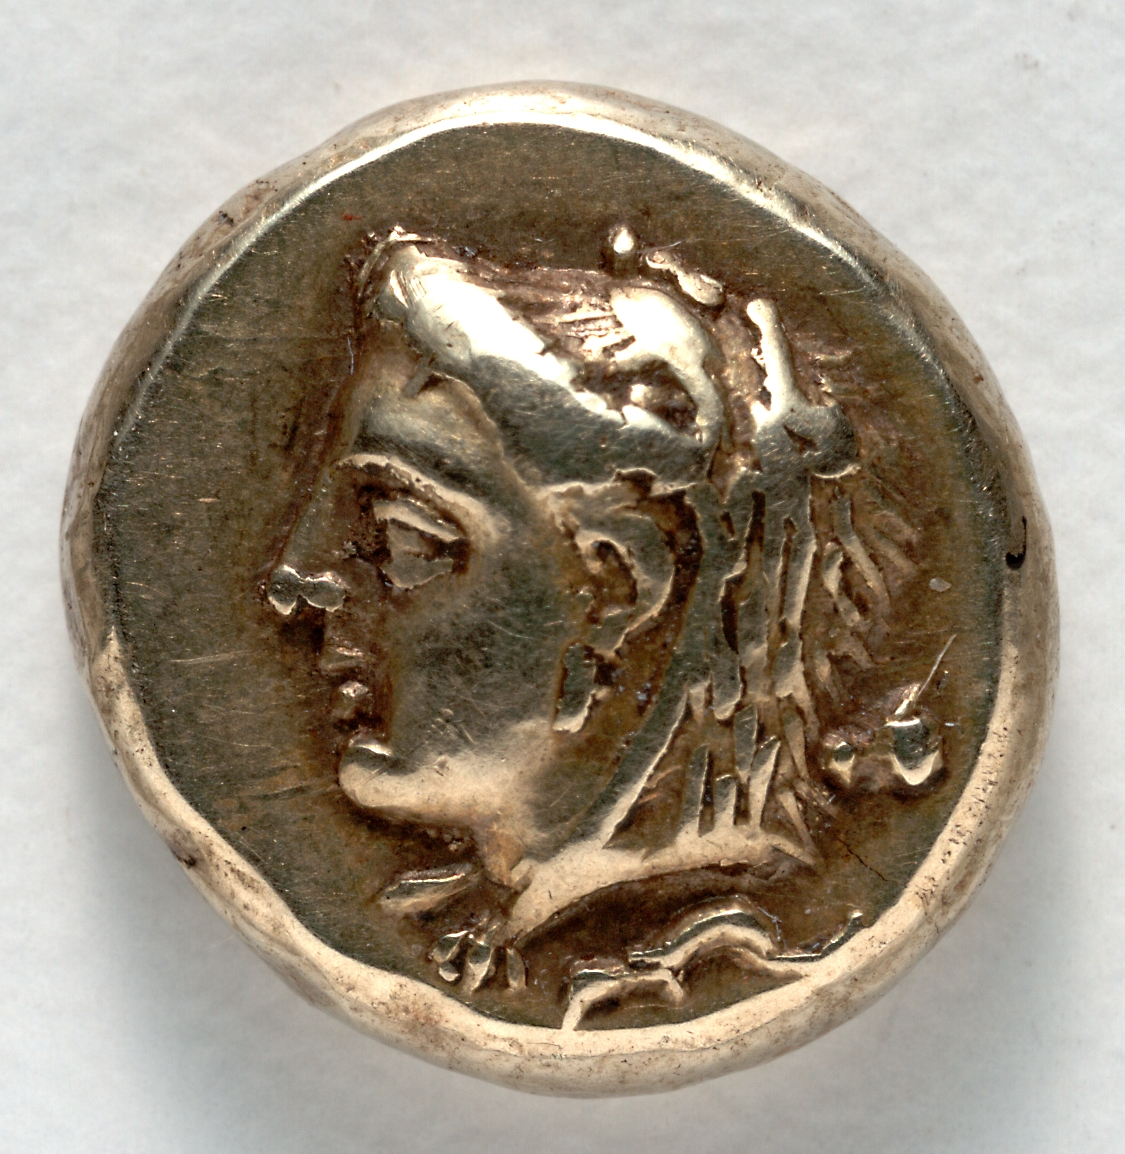 Hecte: Head of Omphale (obverse)